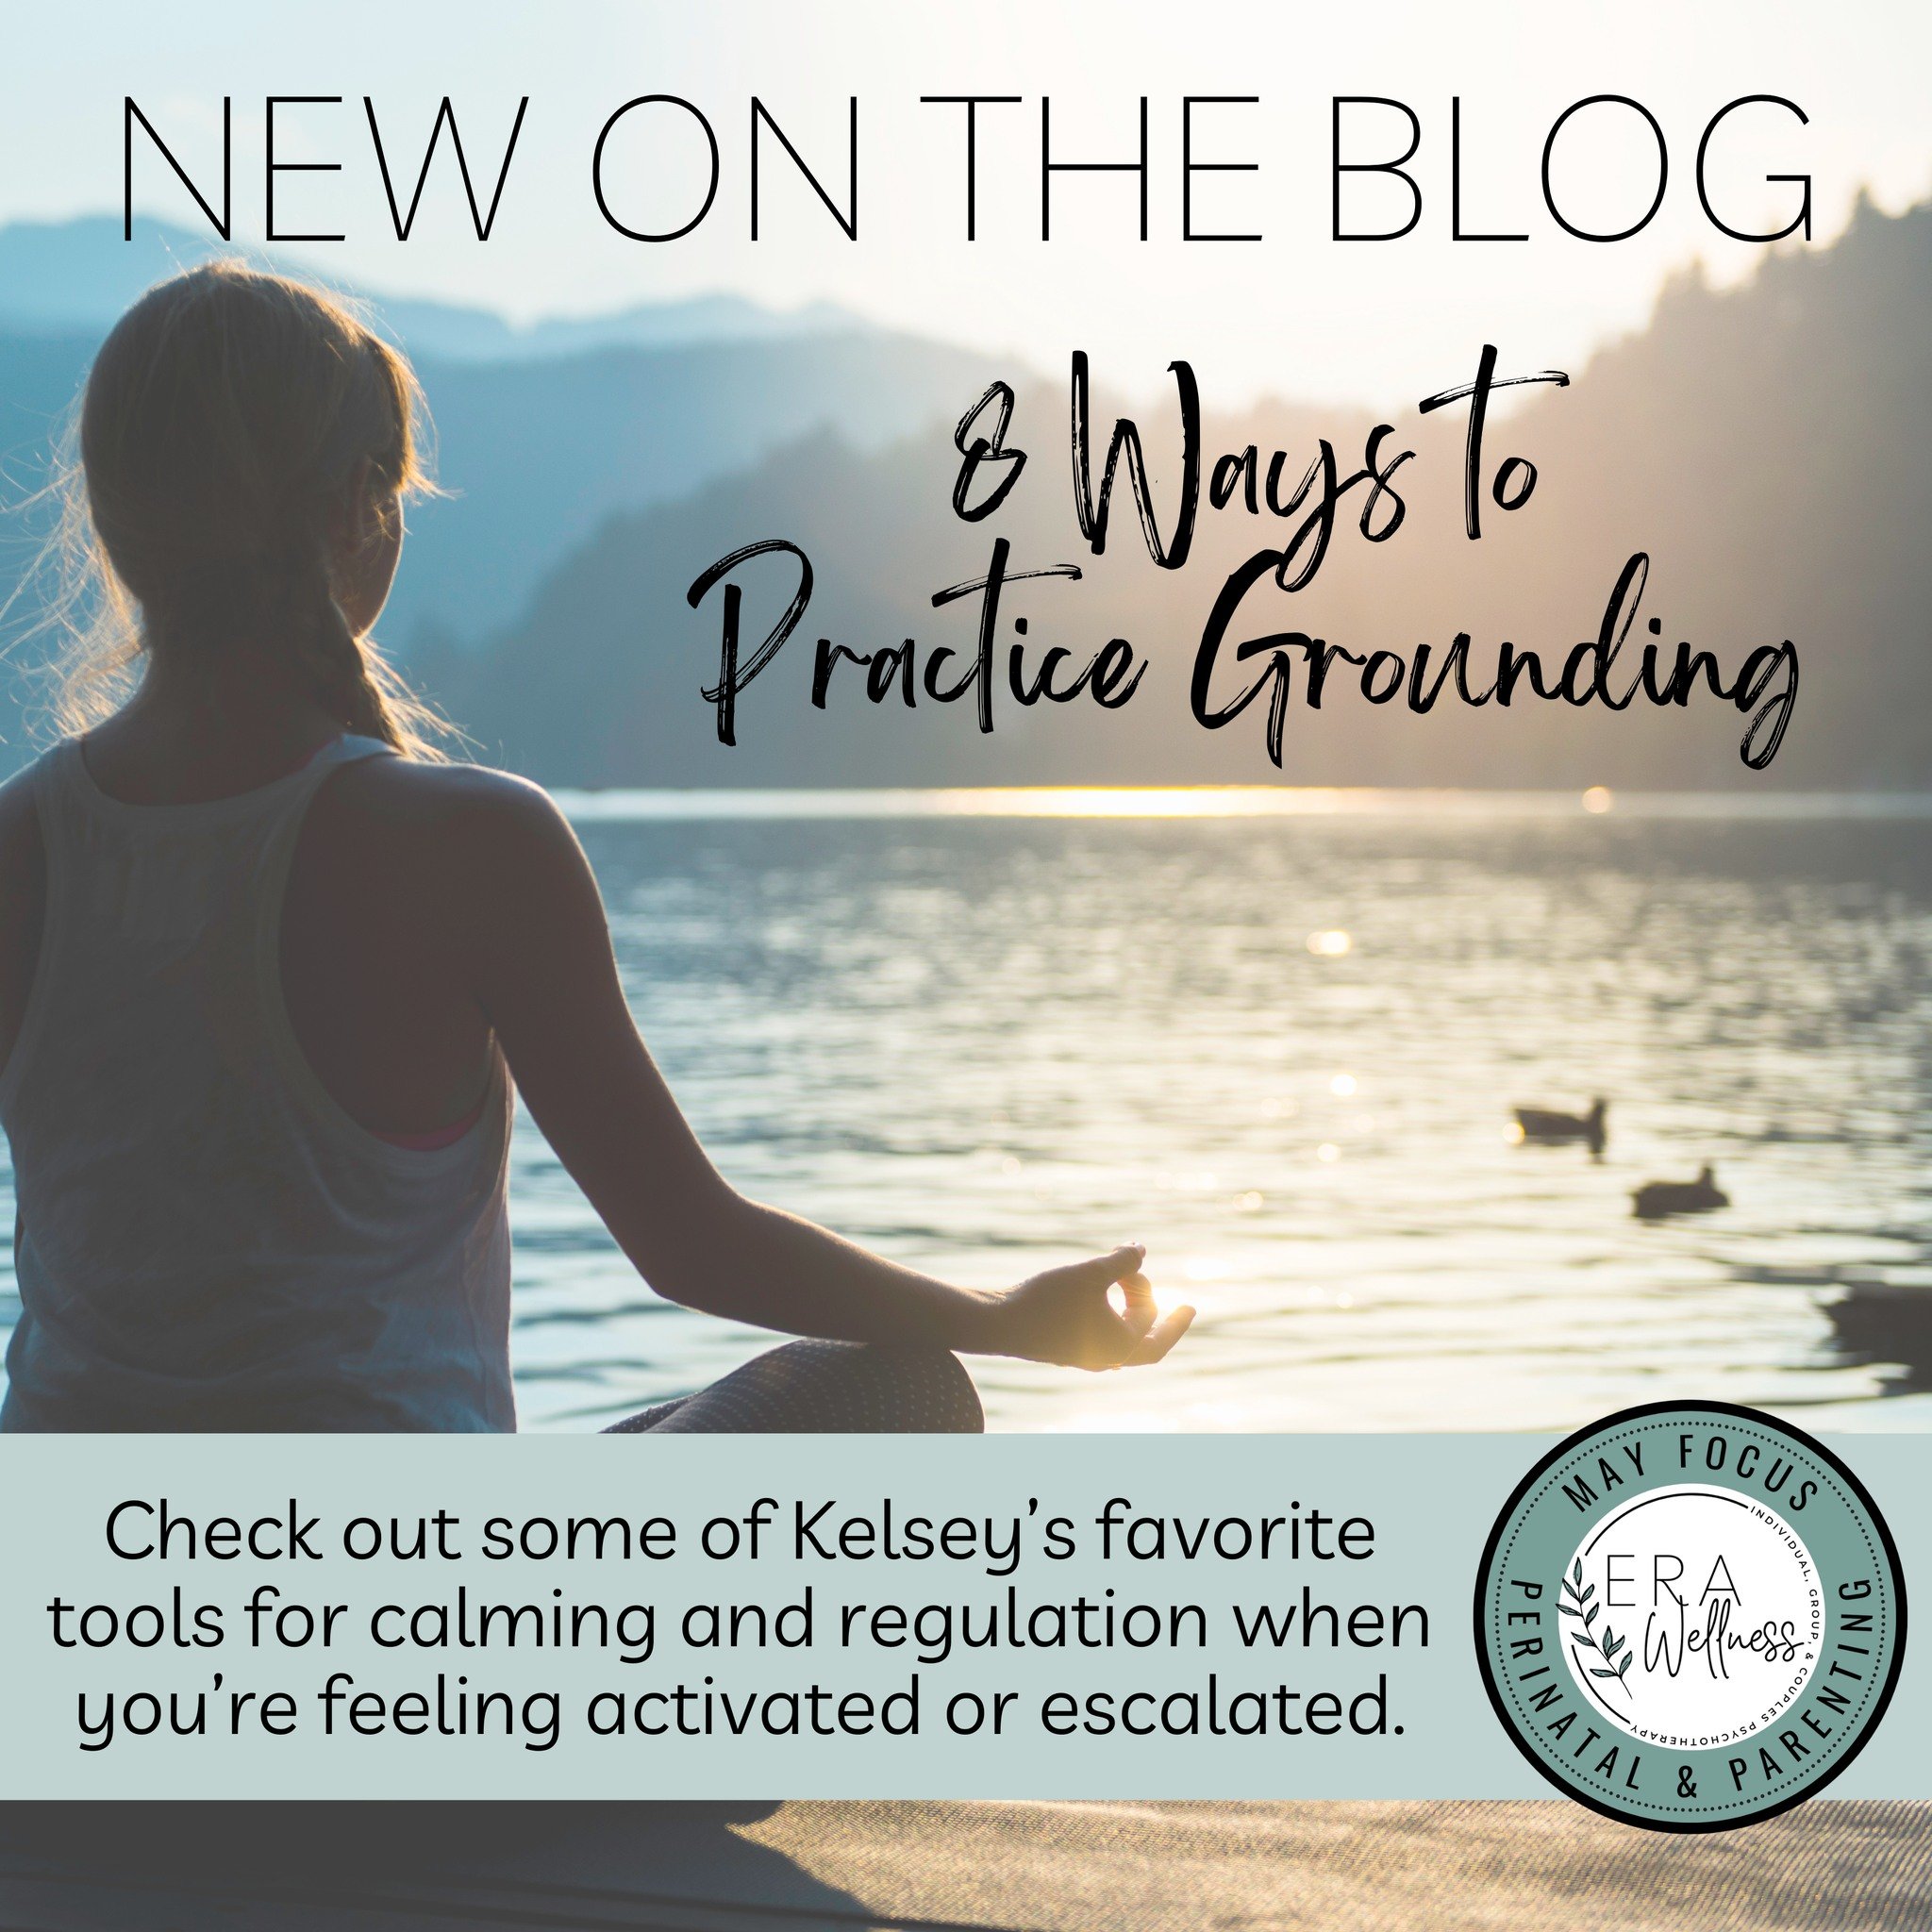 NEW ON THE BLOG

8 Ways to Practice Grounding

It happens to everyone - sometimes we're just escalated, activated, anxious, or all around out of sorts. Grounding is the practice of shifting back to the &quot;here and now&quot;. Read this week's blog 